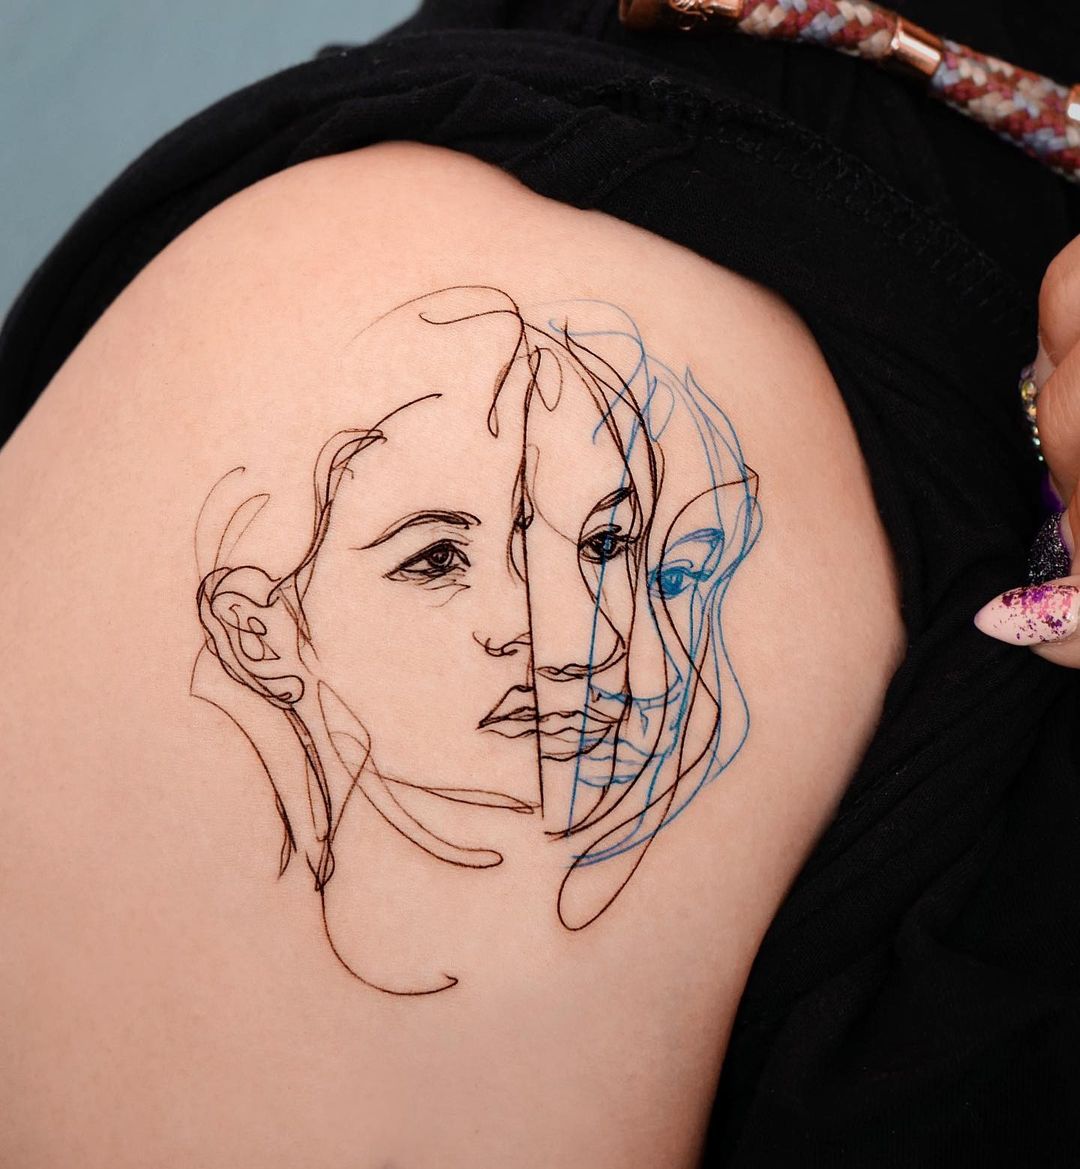 17 Simple One-Line Tattoos That Are Worth The Pain